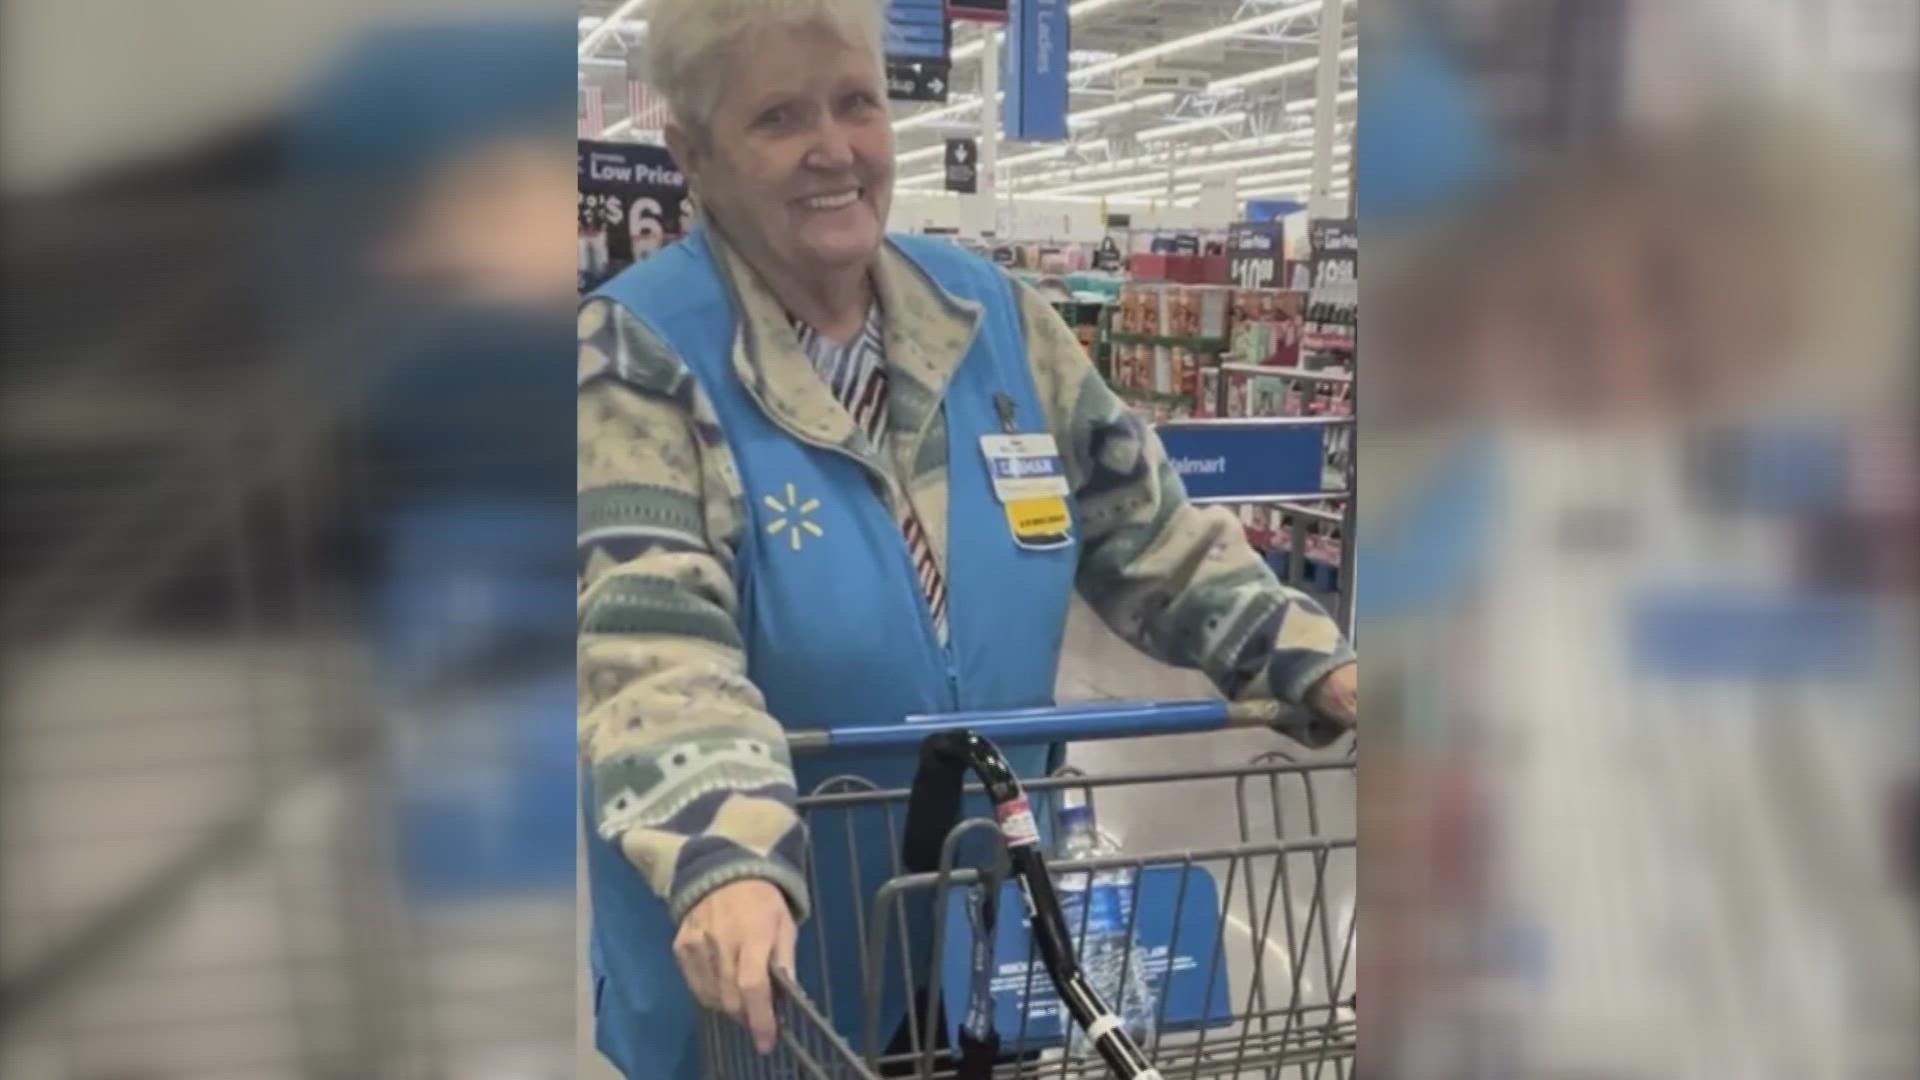 What started as a grocery shopping trip to Walmart in Apache Junction – has led to a life-changing moment for an elderly woman who was working as a greeter.